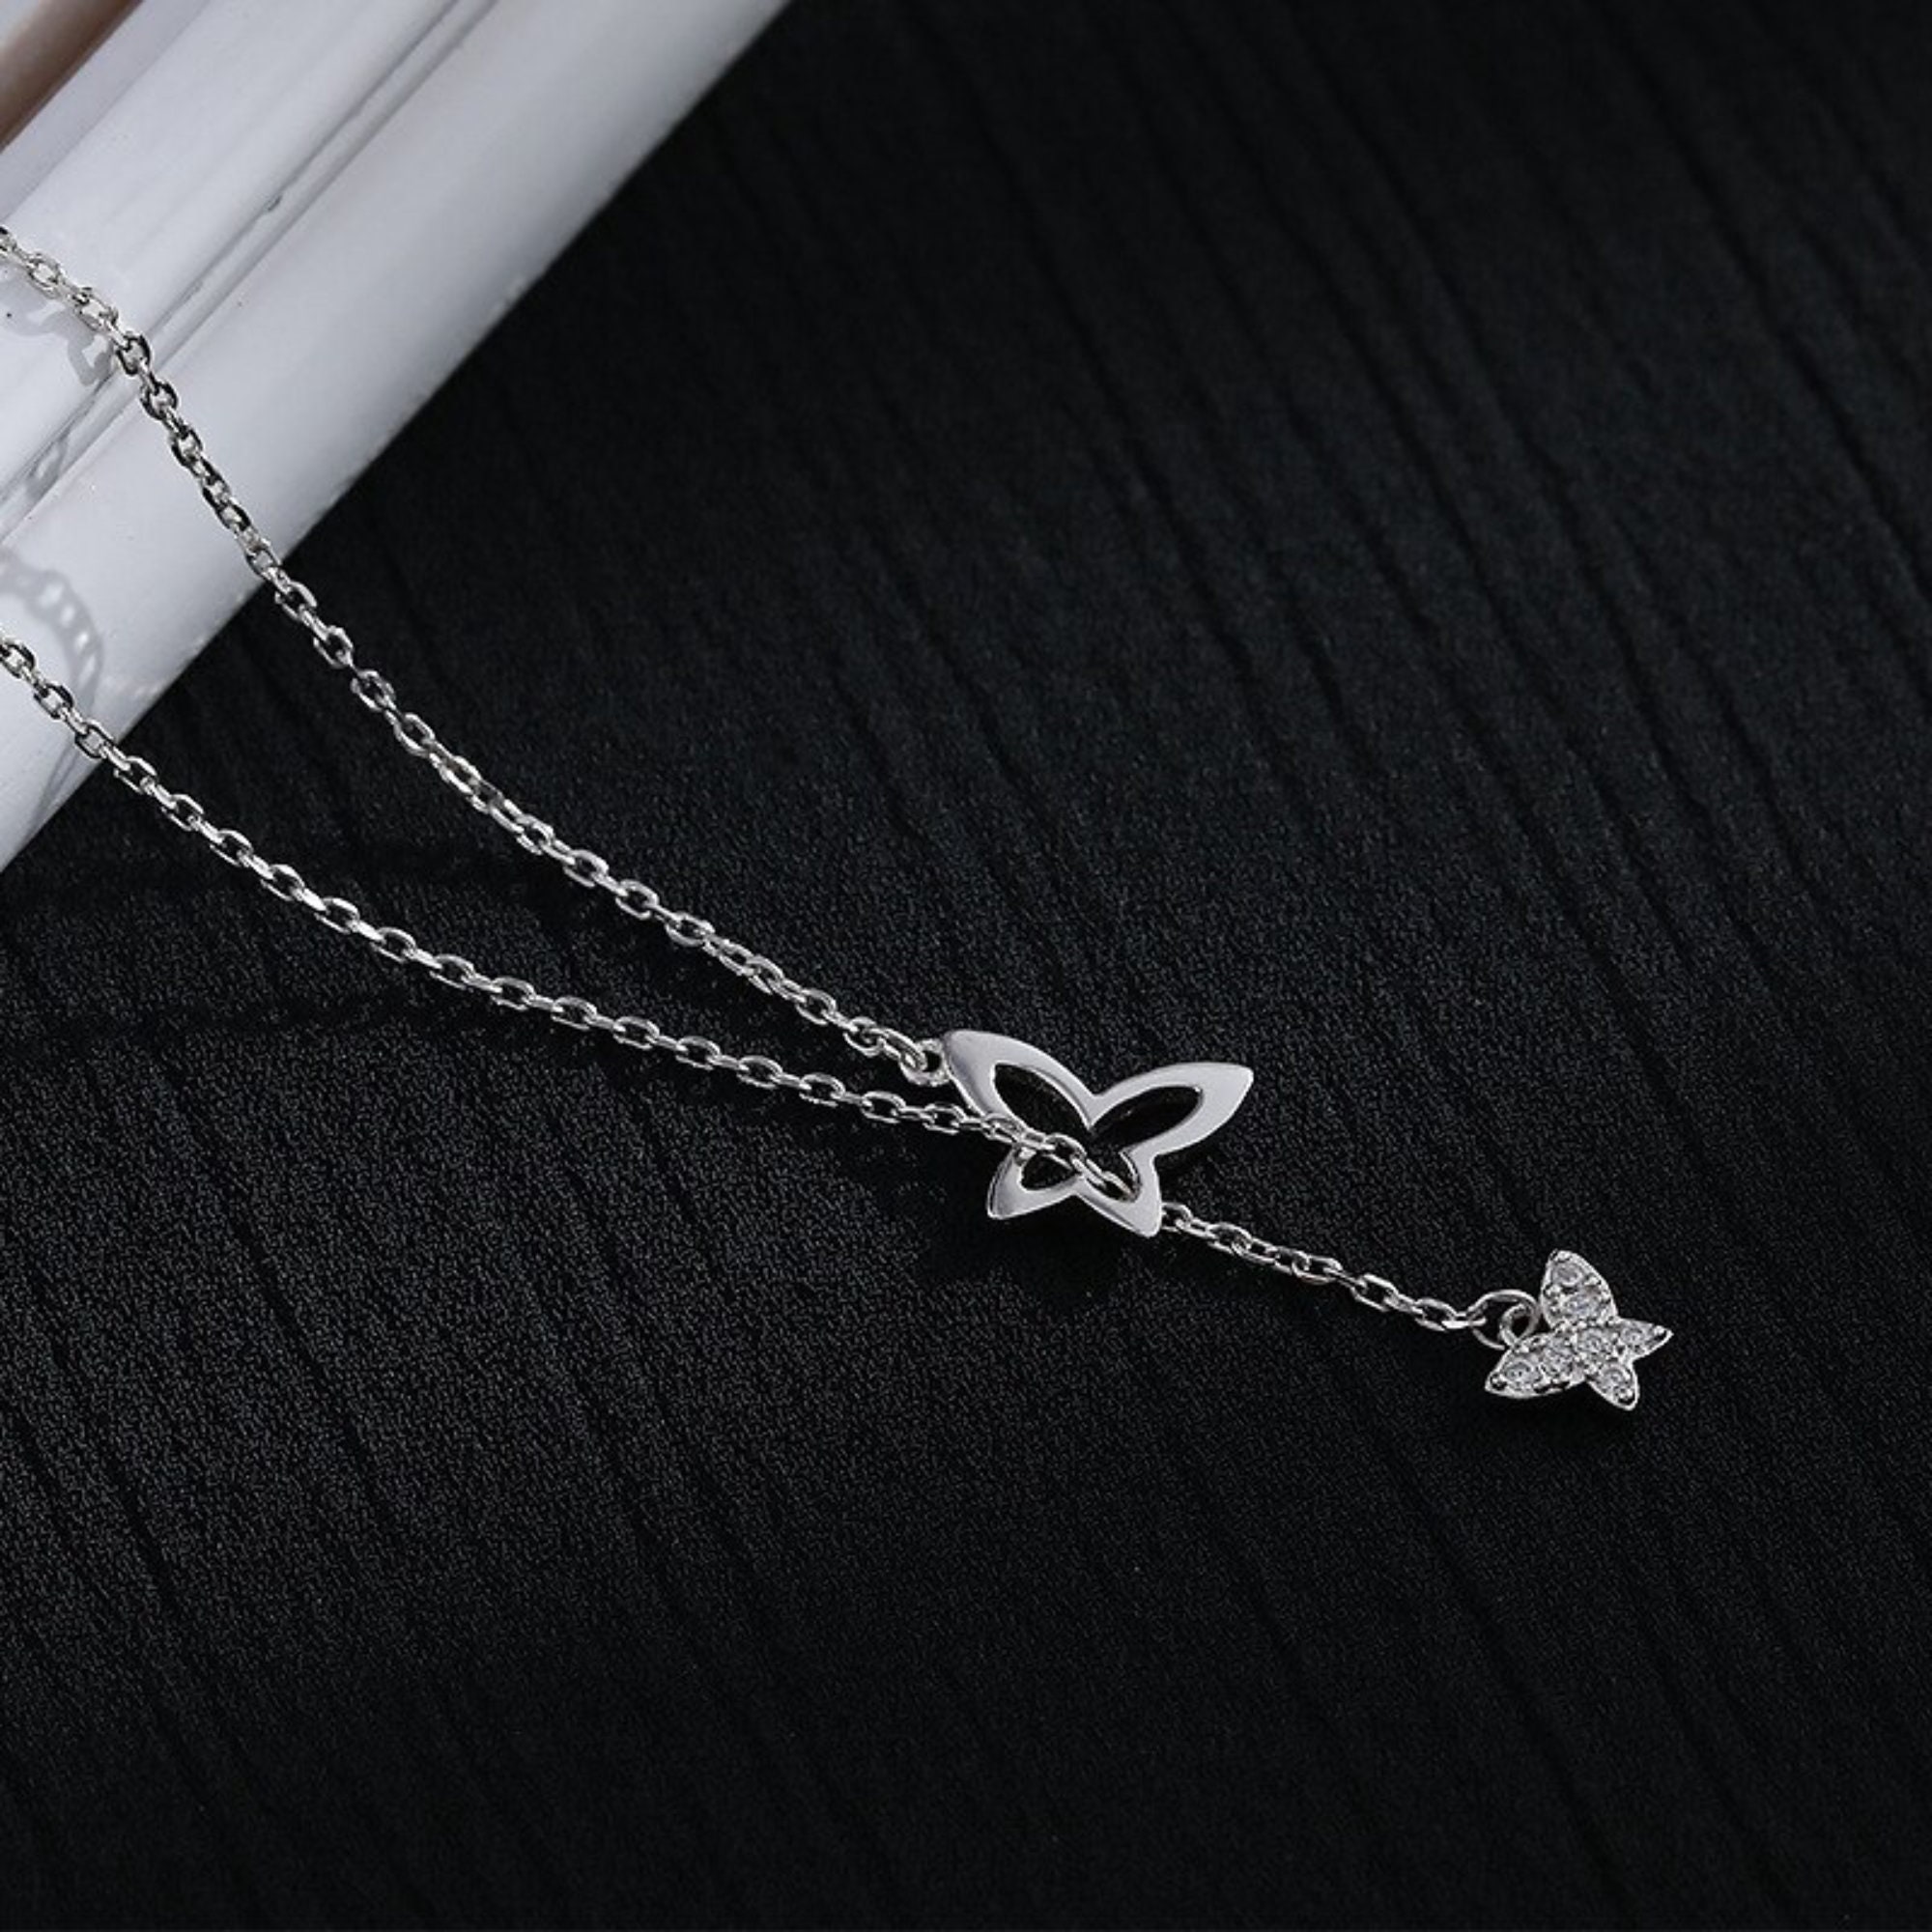 Elegant Double Butterfly Silver Chain Necklace Dainty - Etsy